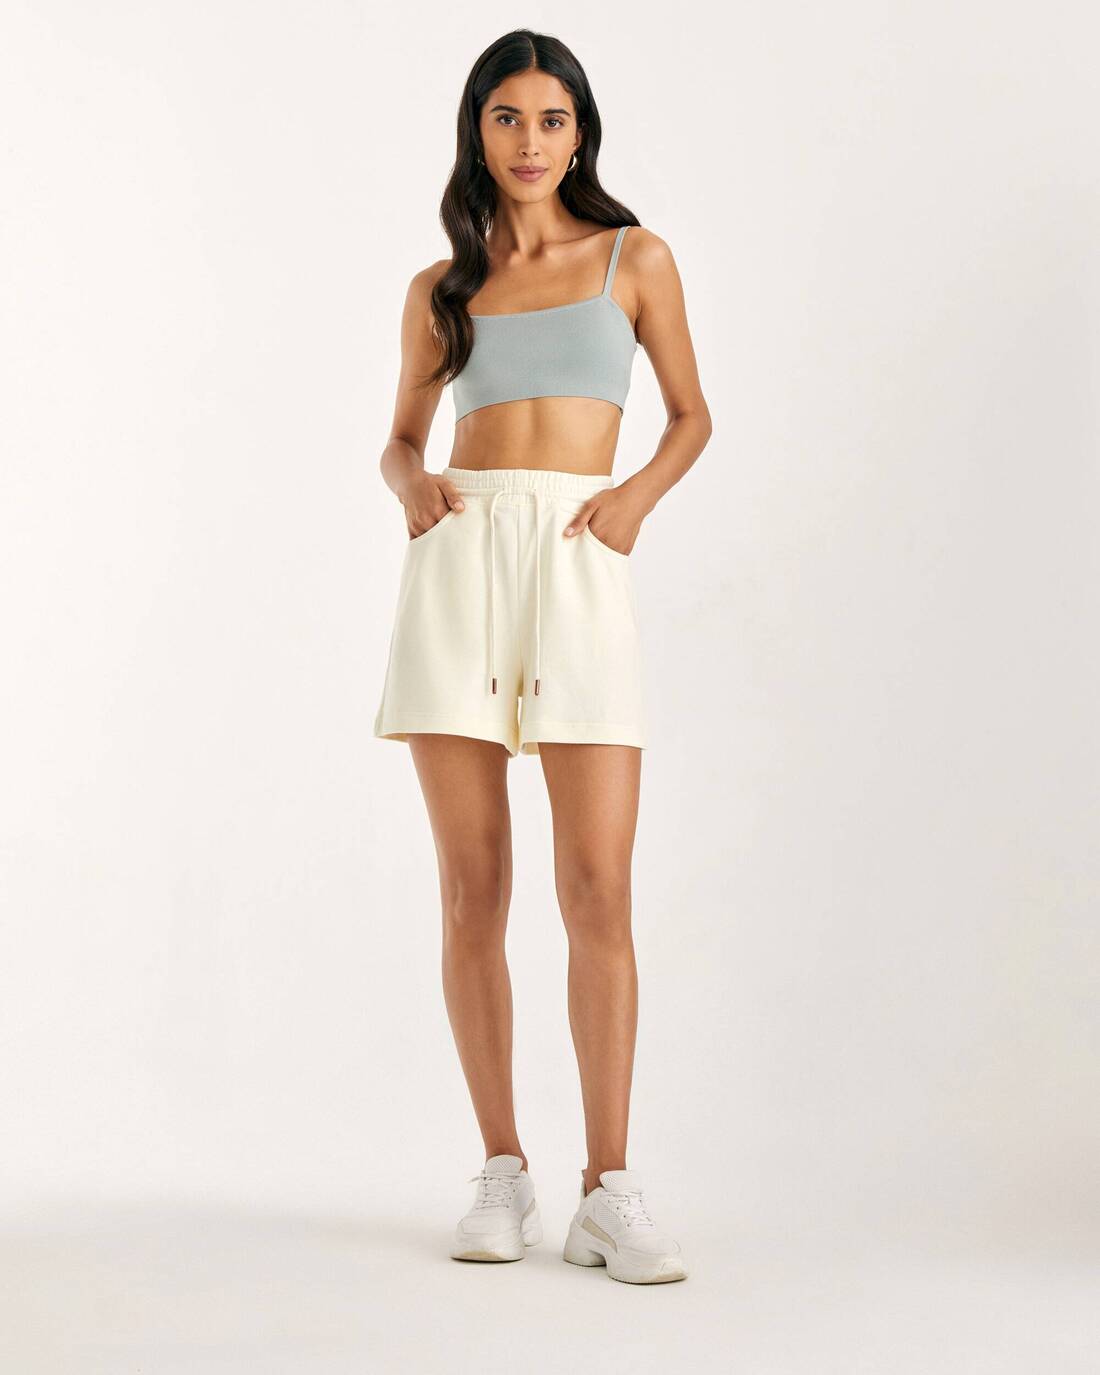 A-line footer shorts 